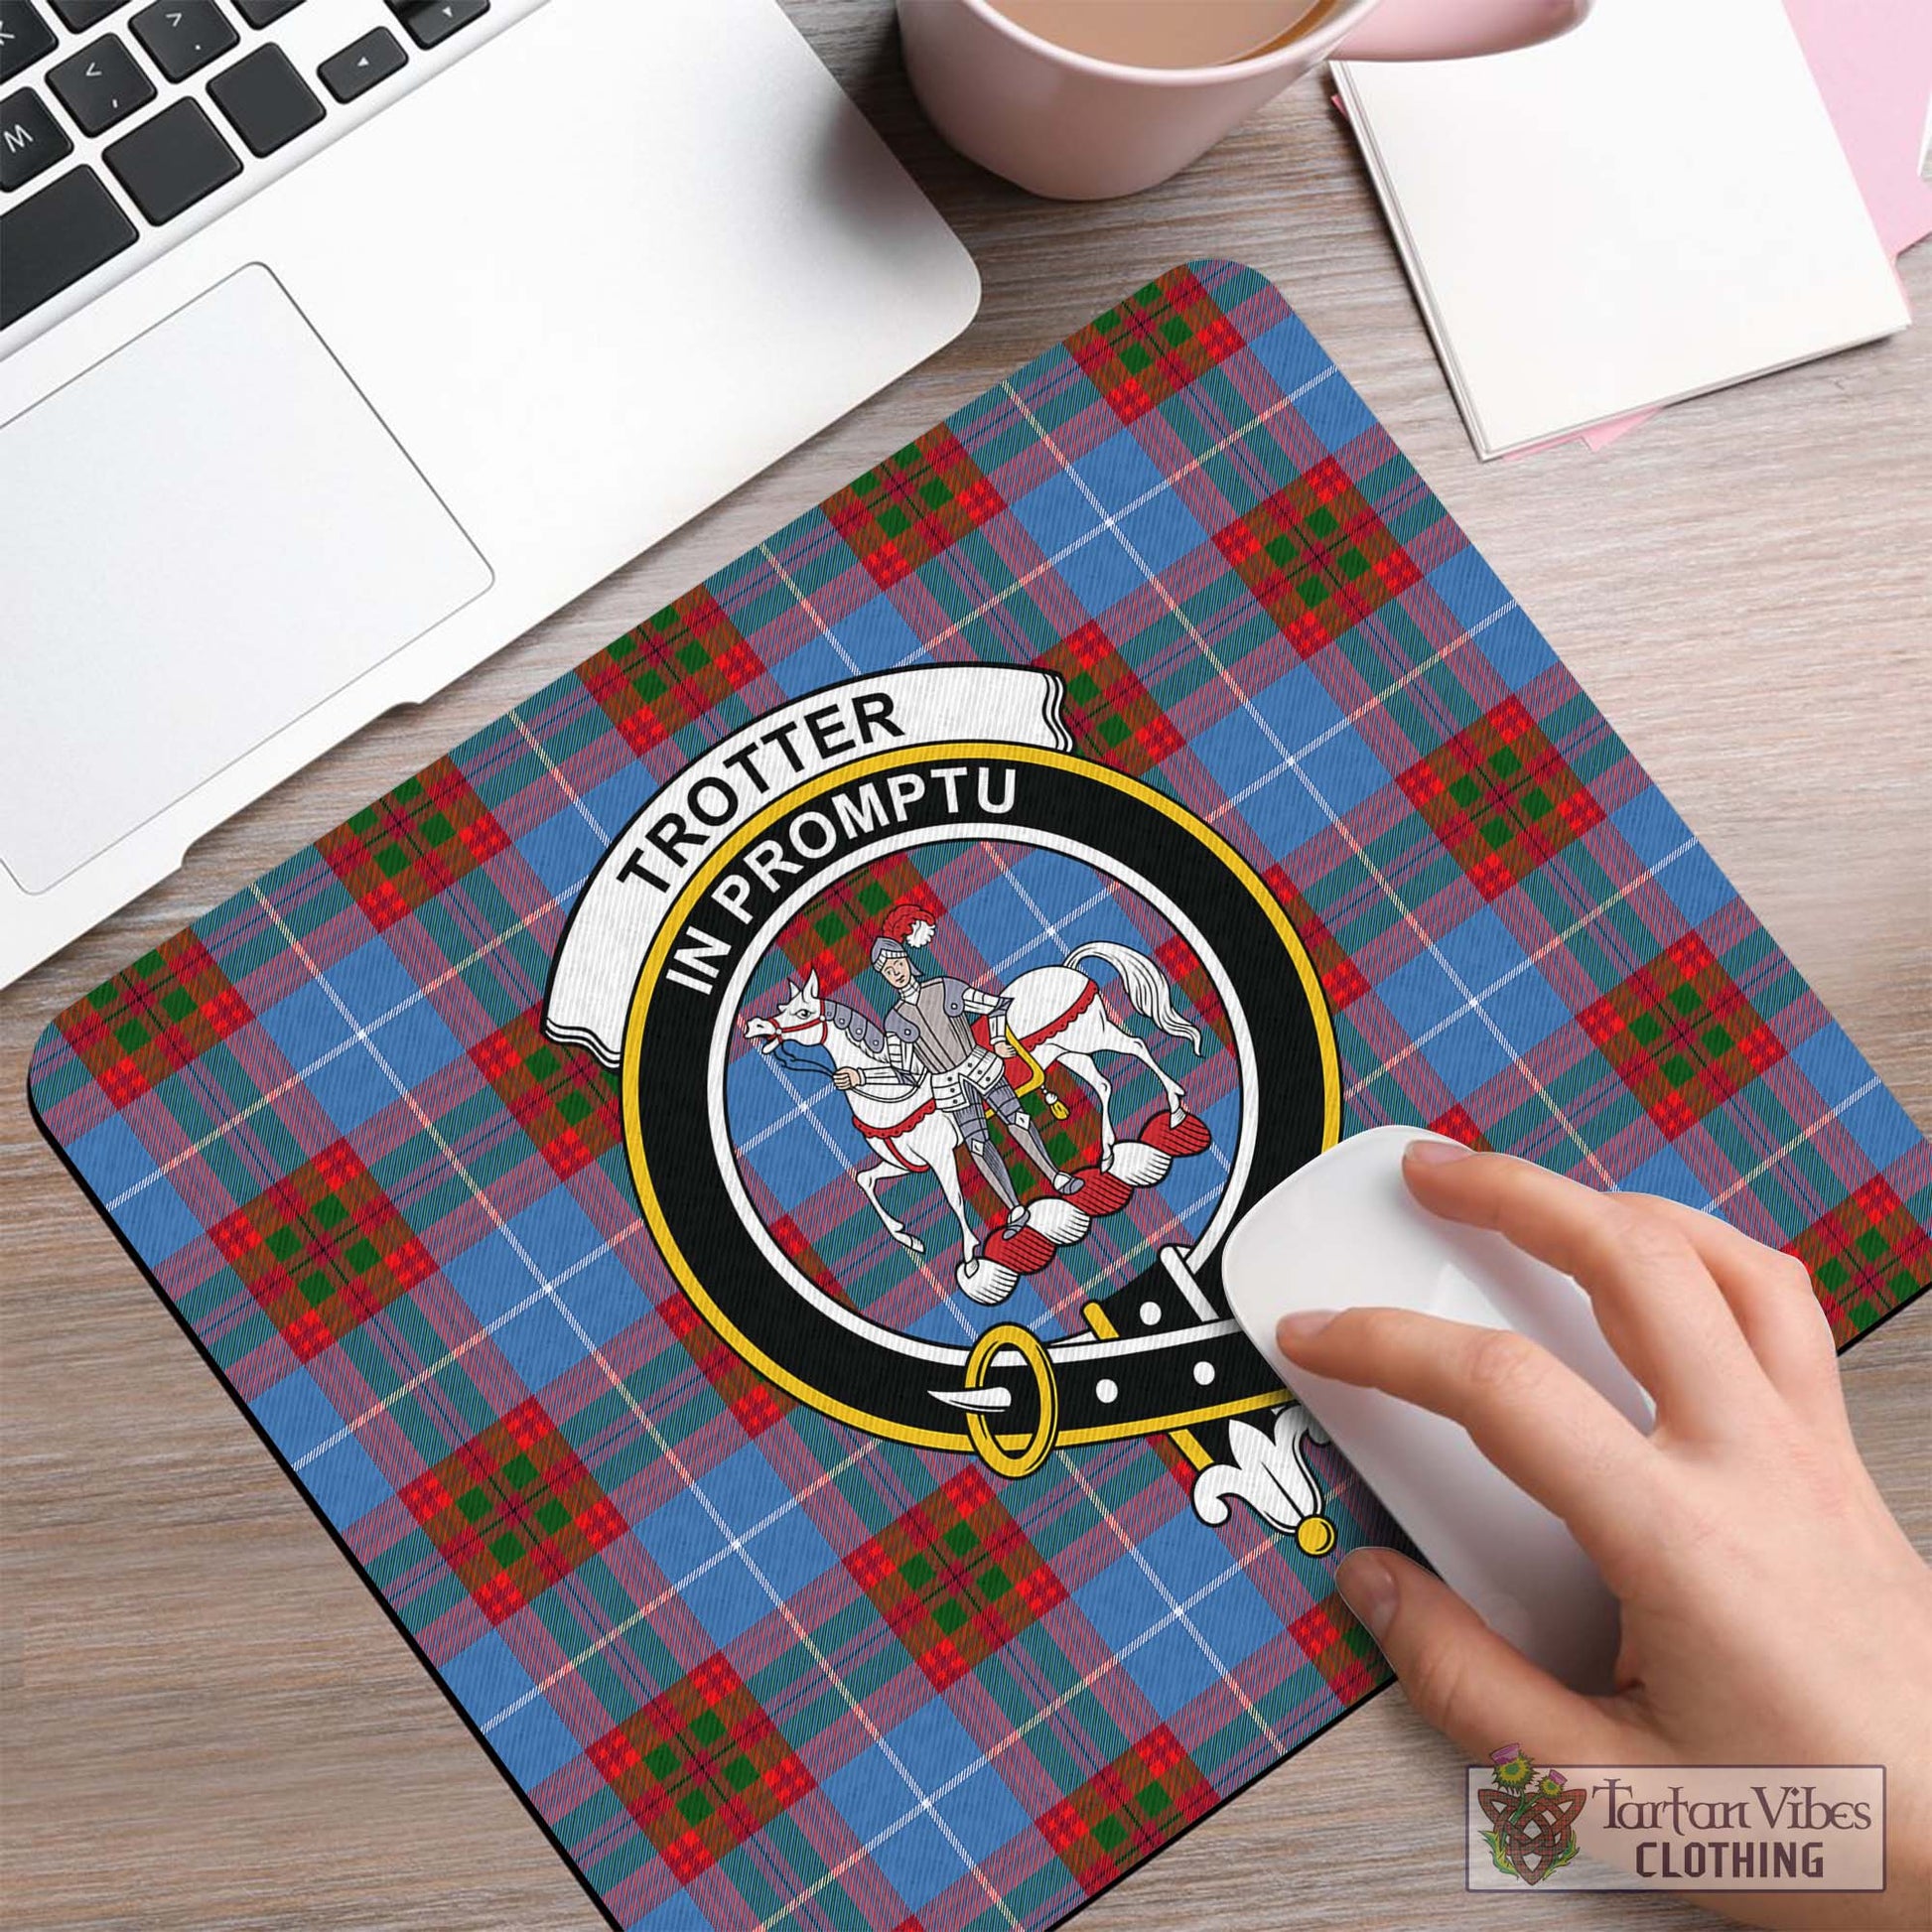 Tartan Vibes Clothing Trotter Tartan Mouse Pad with Family Crest